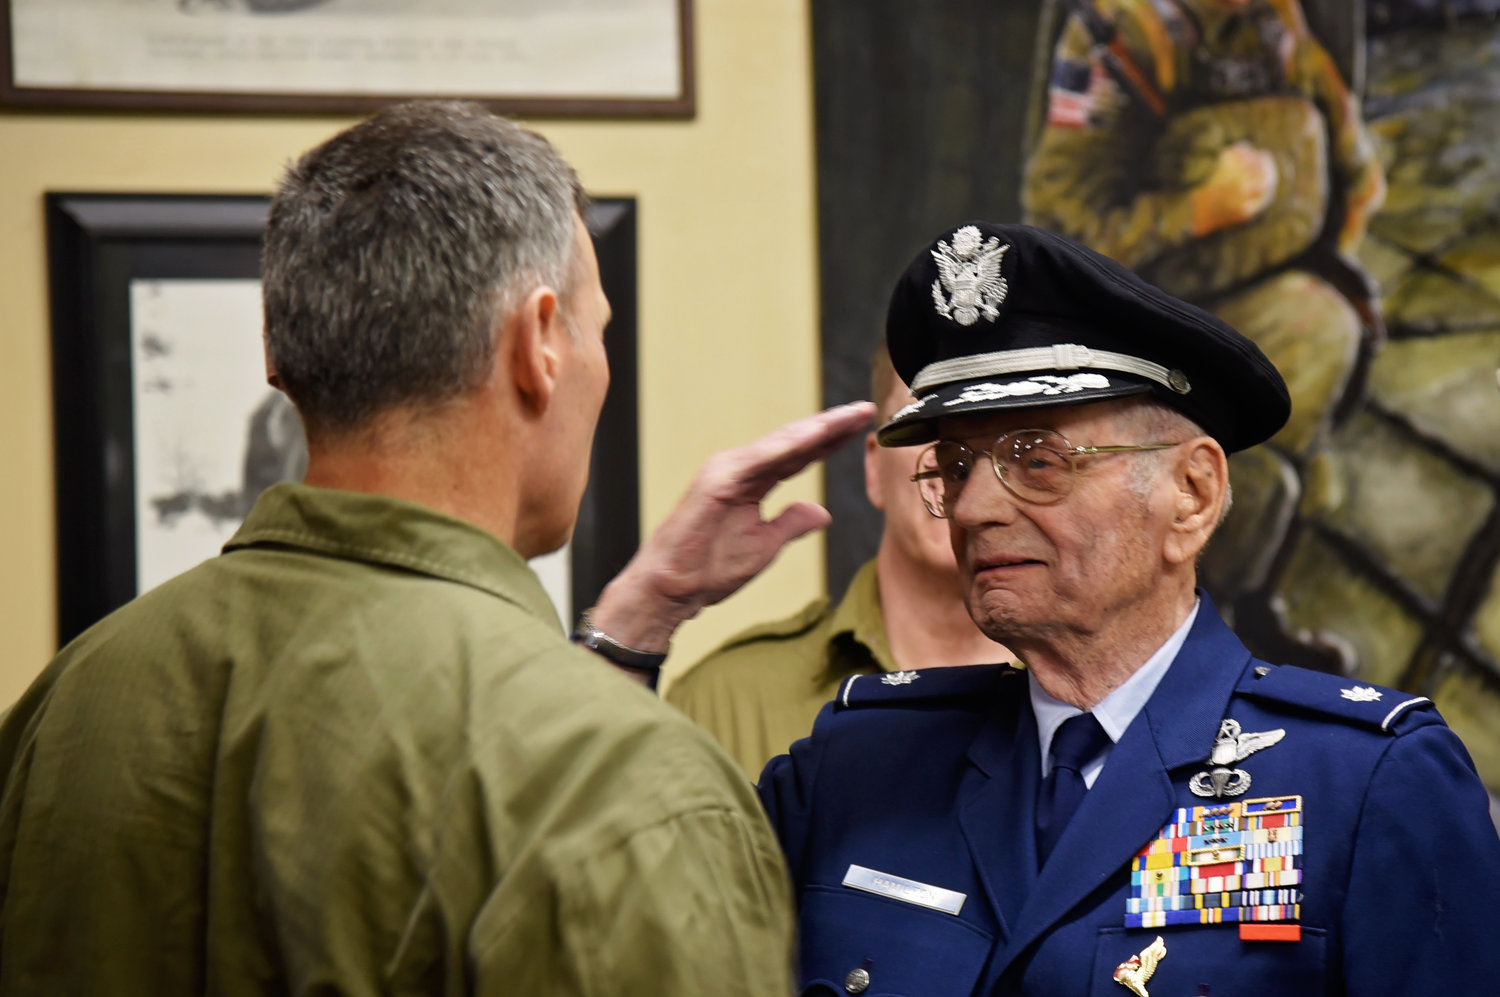 LTC Dave Hamilton (Ret.) pins wings on Martin Gallagher at the wing pinning ceremony held July 23, 2022.